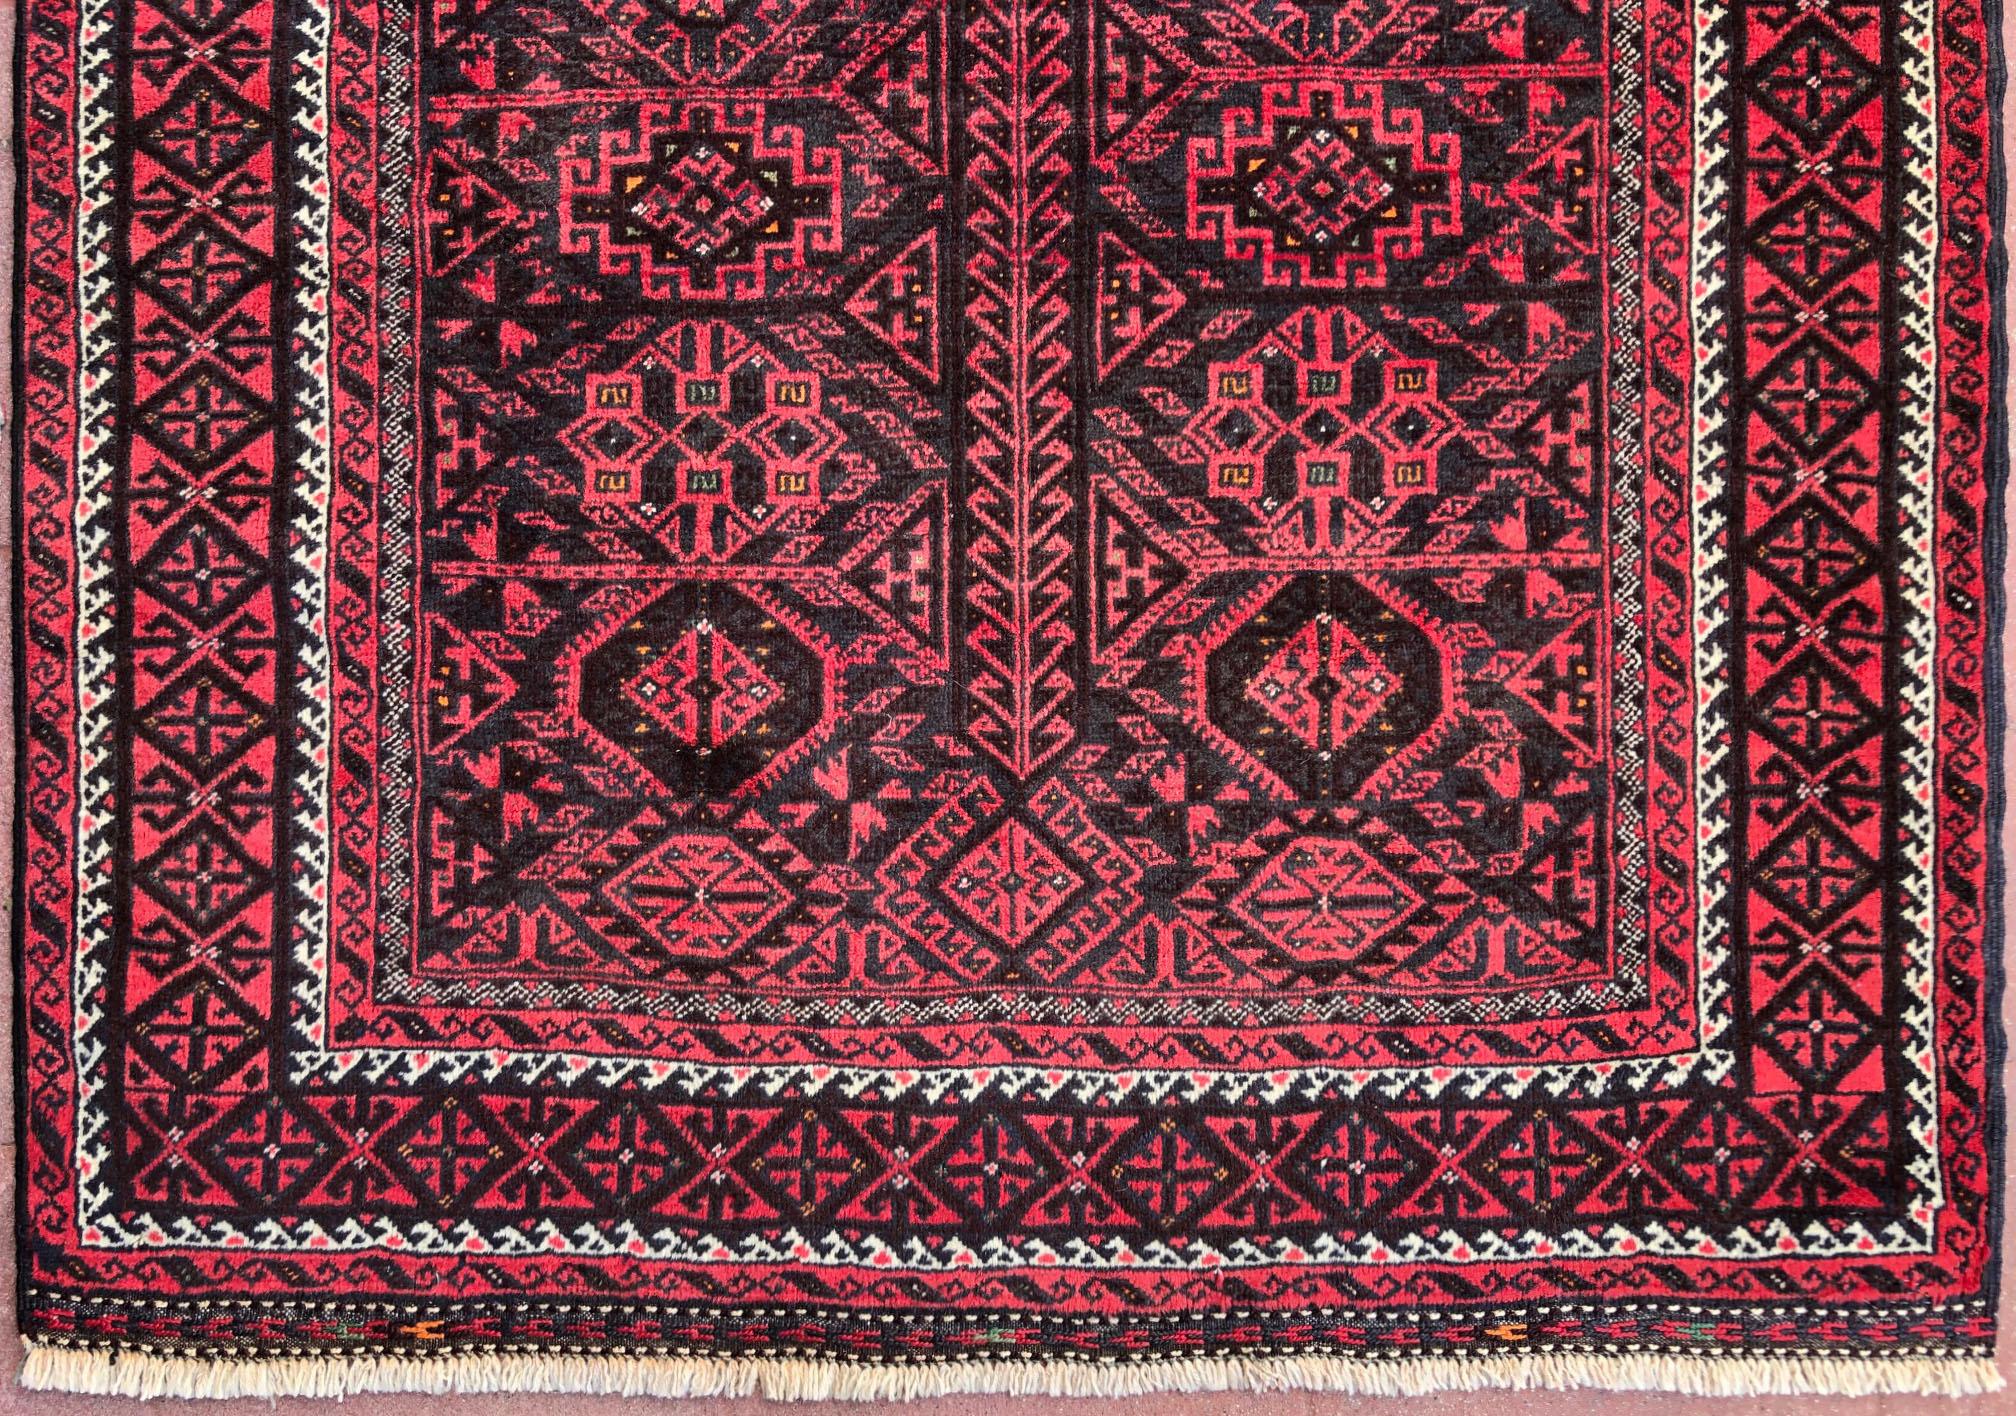 Authentic Persian Hand Knotted Geometric All-Over Red Black Baluchi Rug, 1960 For Sale 2